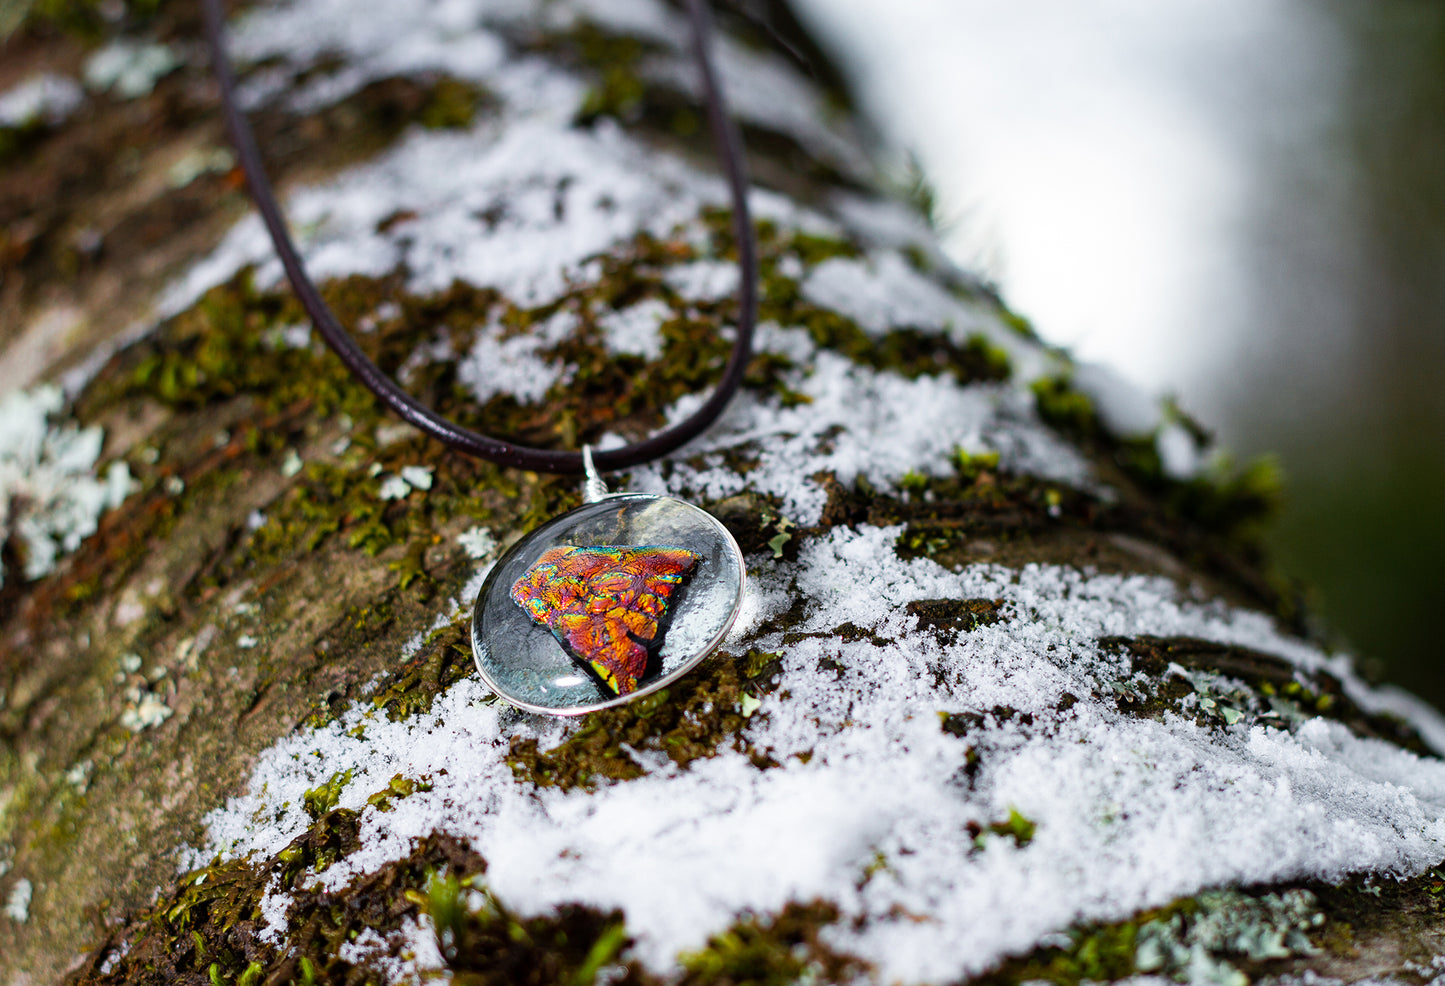 A molten lava-like looking stone with azure details floating in a gold-rimmed circular pendant. Pendant is on brown necklace cord resting on a snow-dusted, mossy tree log.